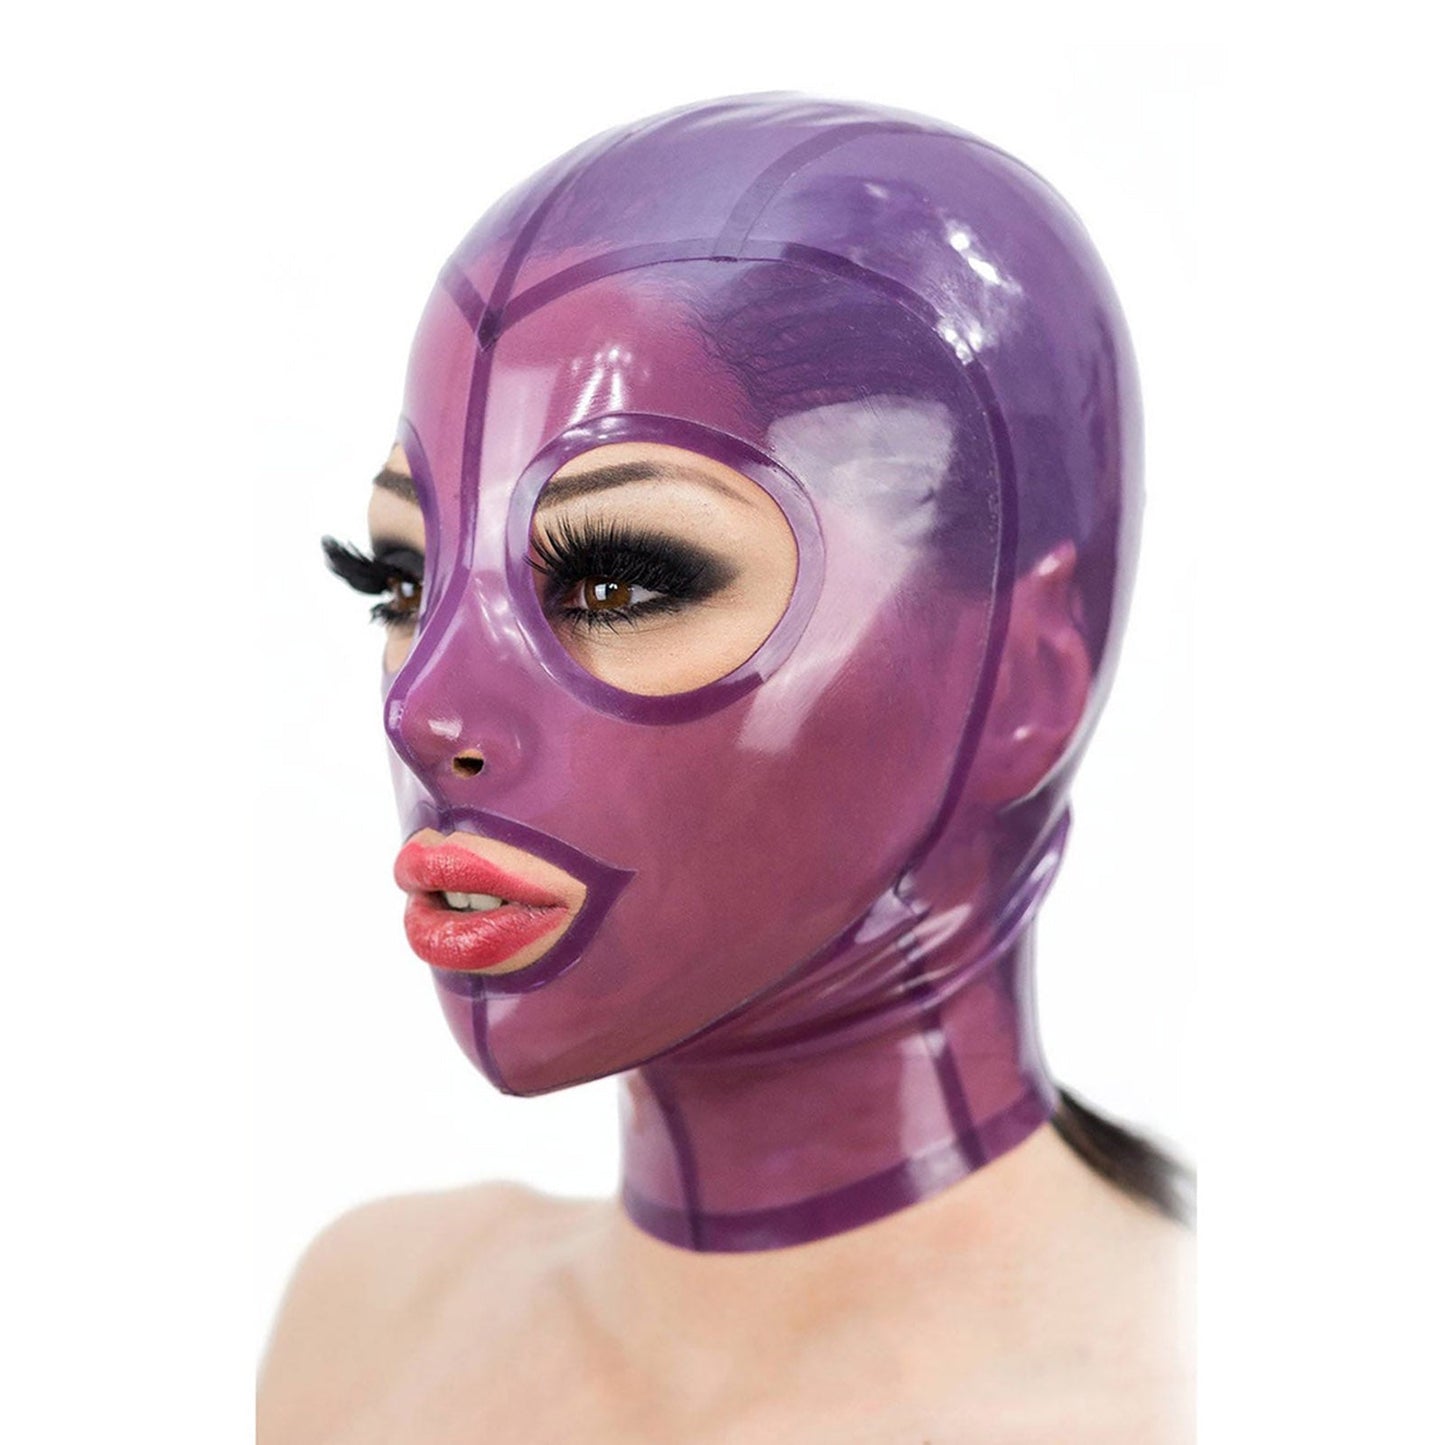 MONNIK Latex Hood Translucent Purple Colors with Trim and Rear Zipper Handmade for Costume Catsuit Cosplay